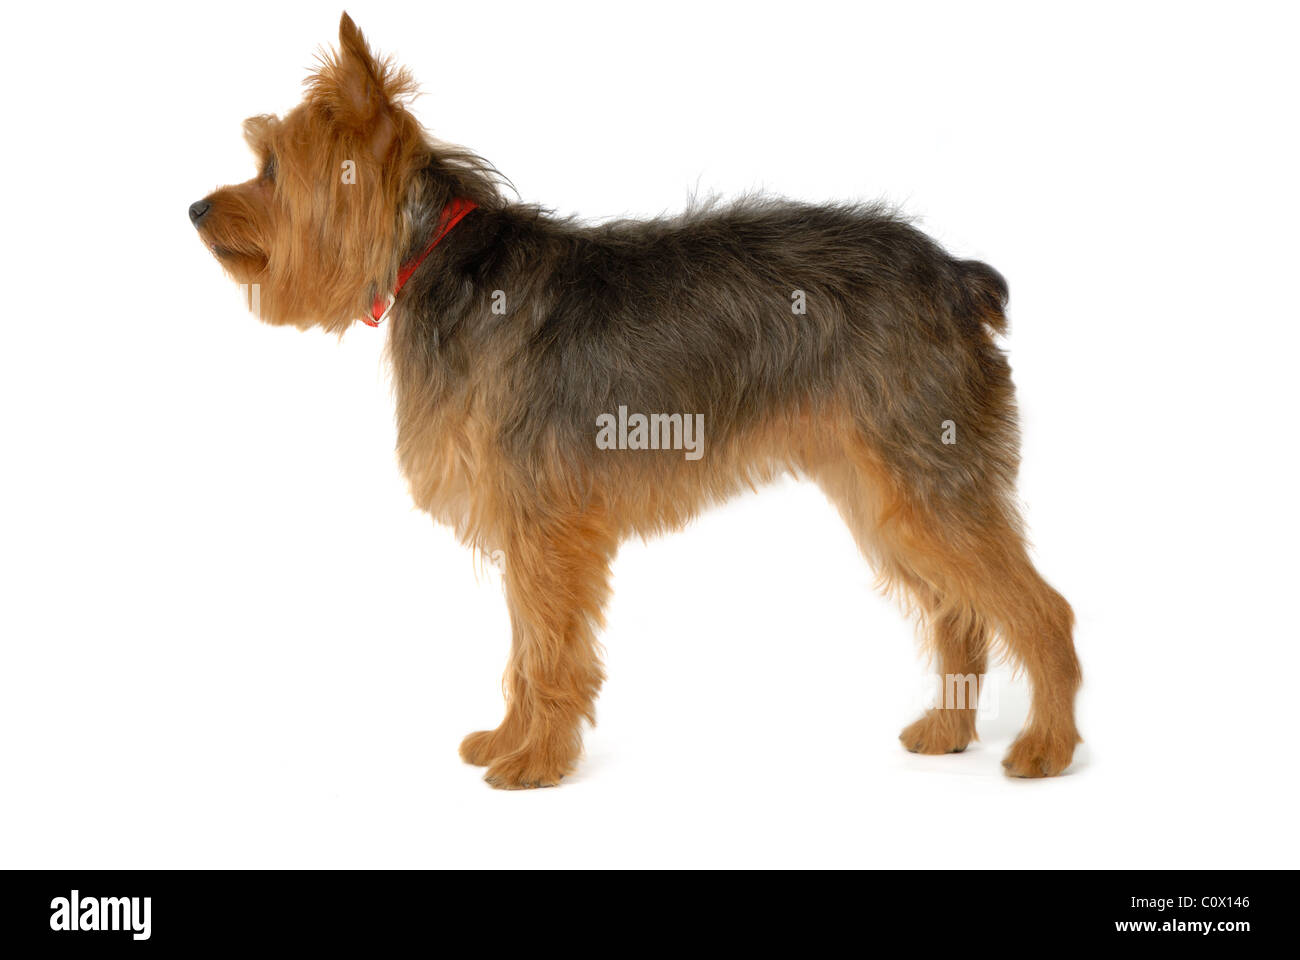 Yorkshire terrier or Yorkie dog, on white background. Stock Photo